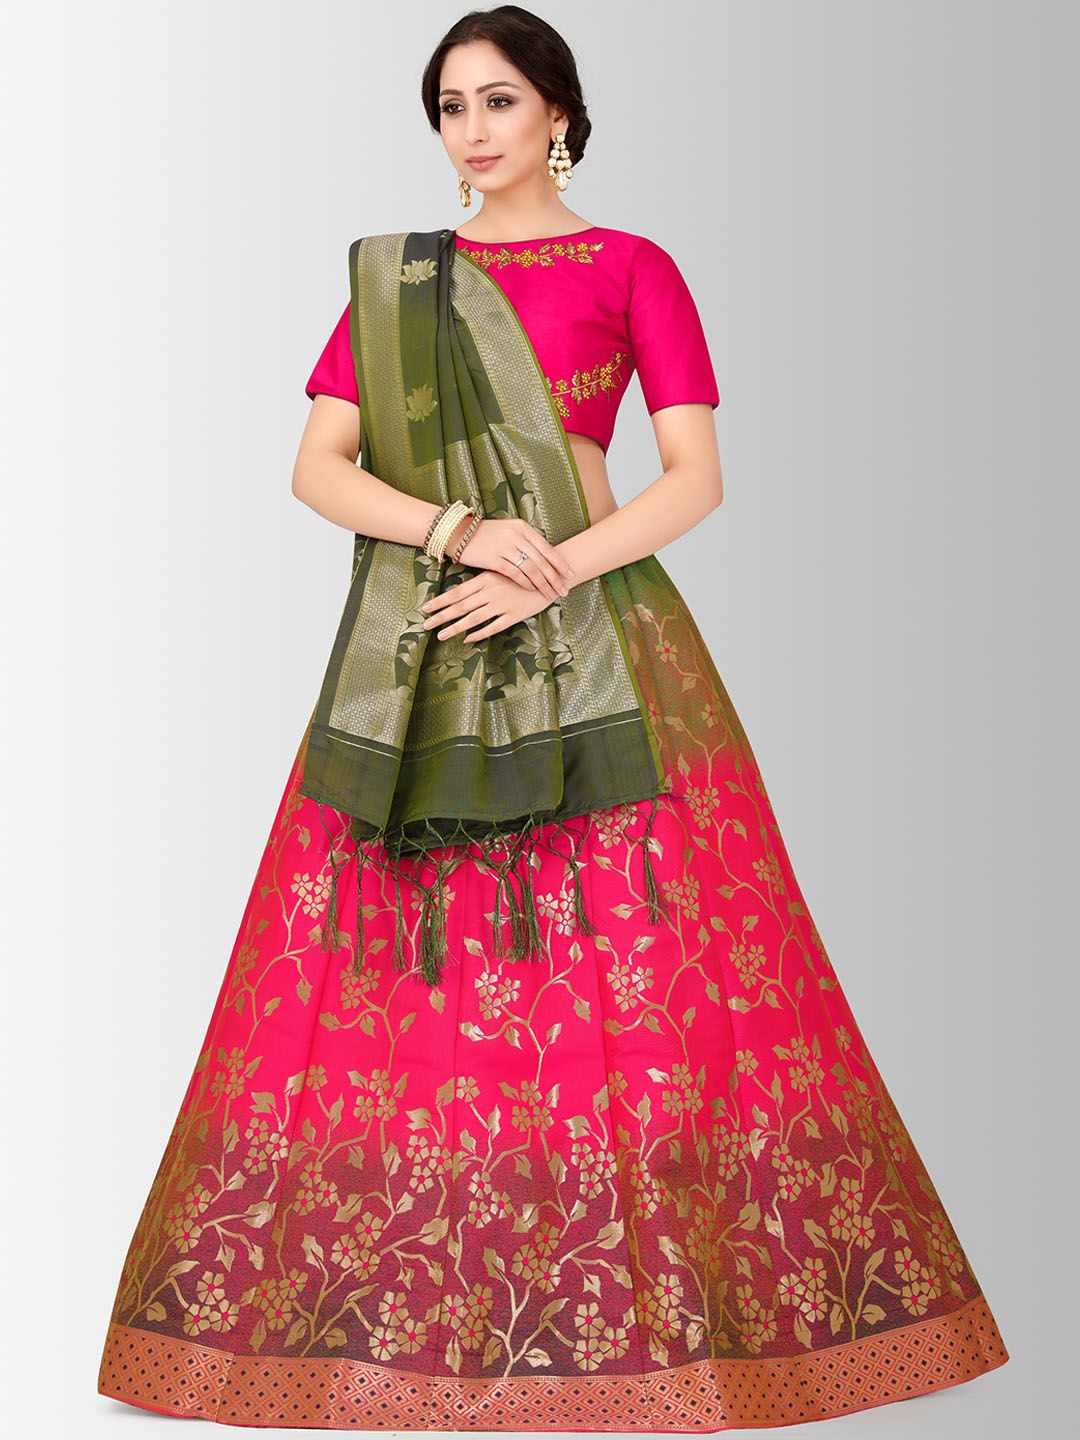 MIMOSA Pink & Green Embroidered Semi-Stitched Bridal Lehenga & Blouse with Dupatta Price in India